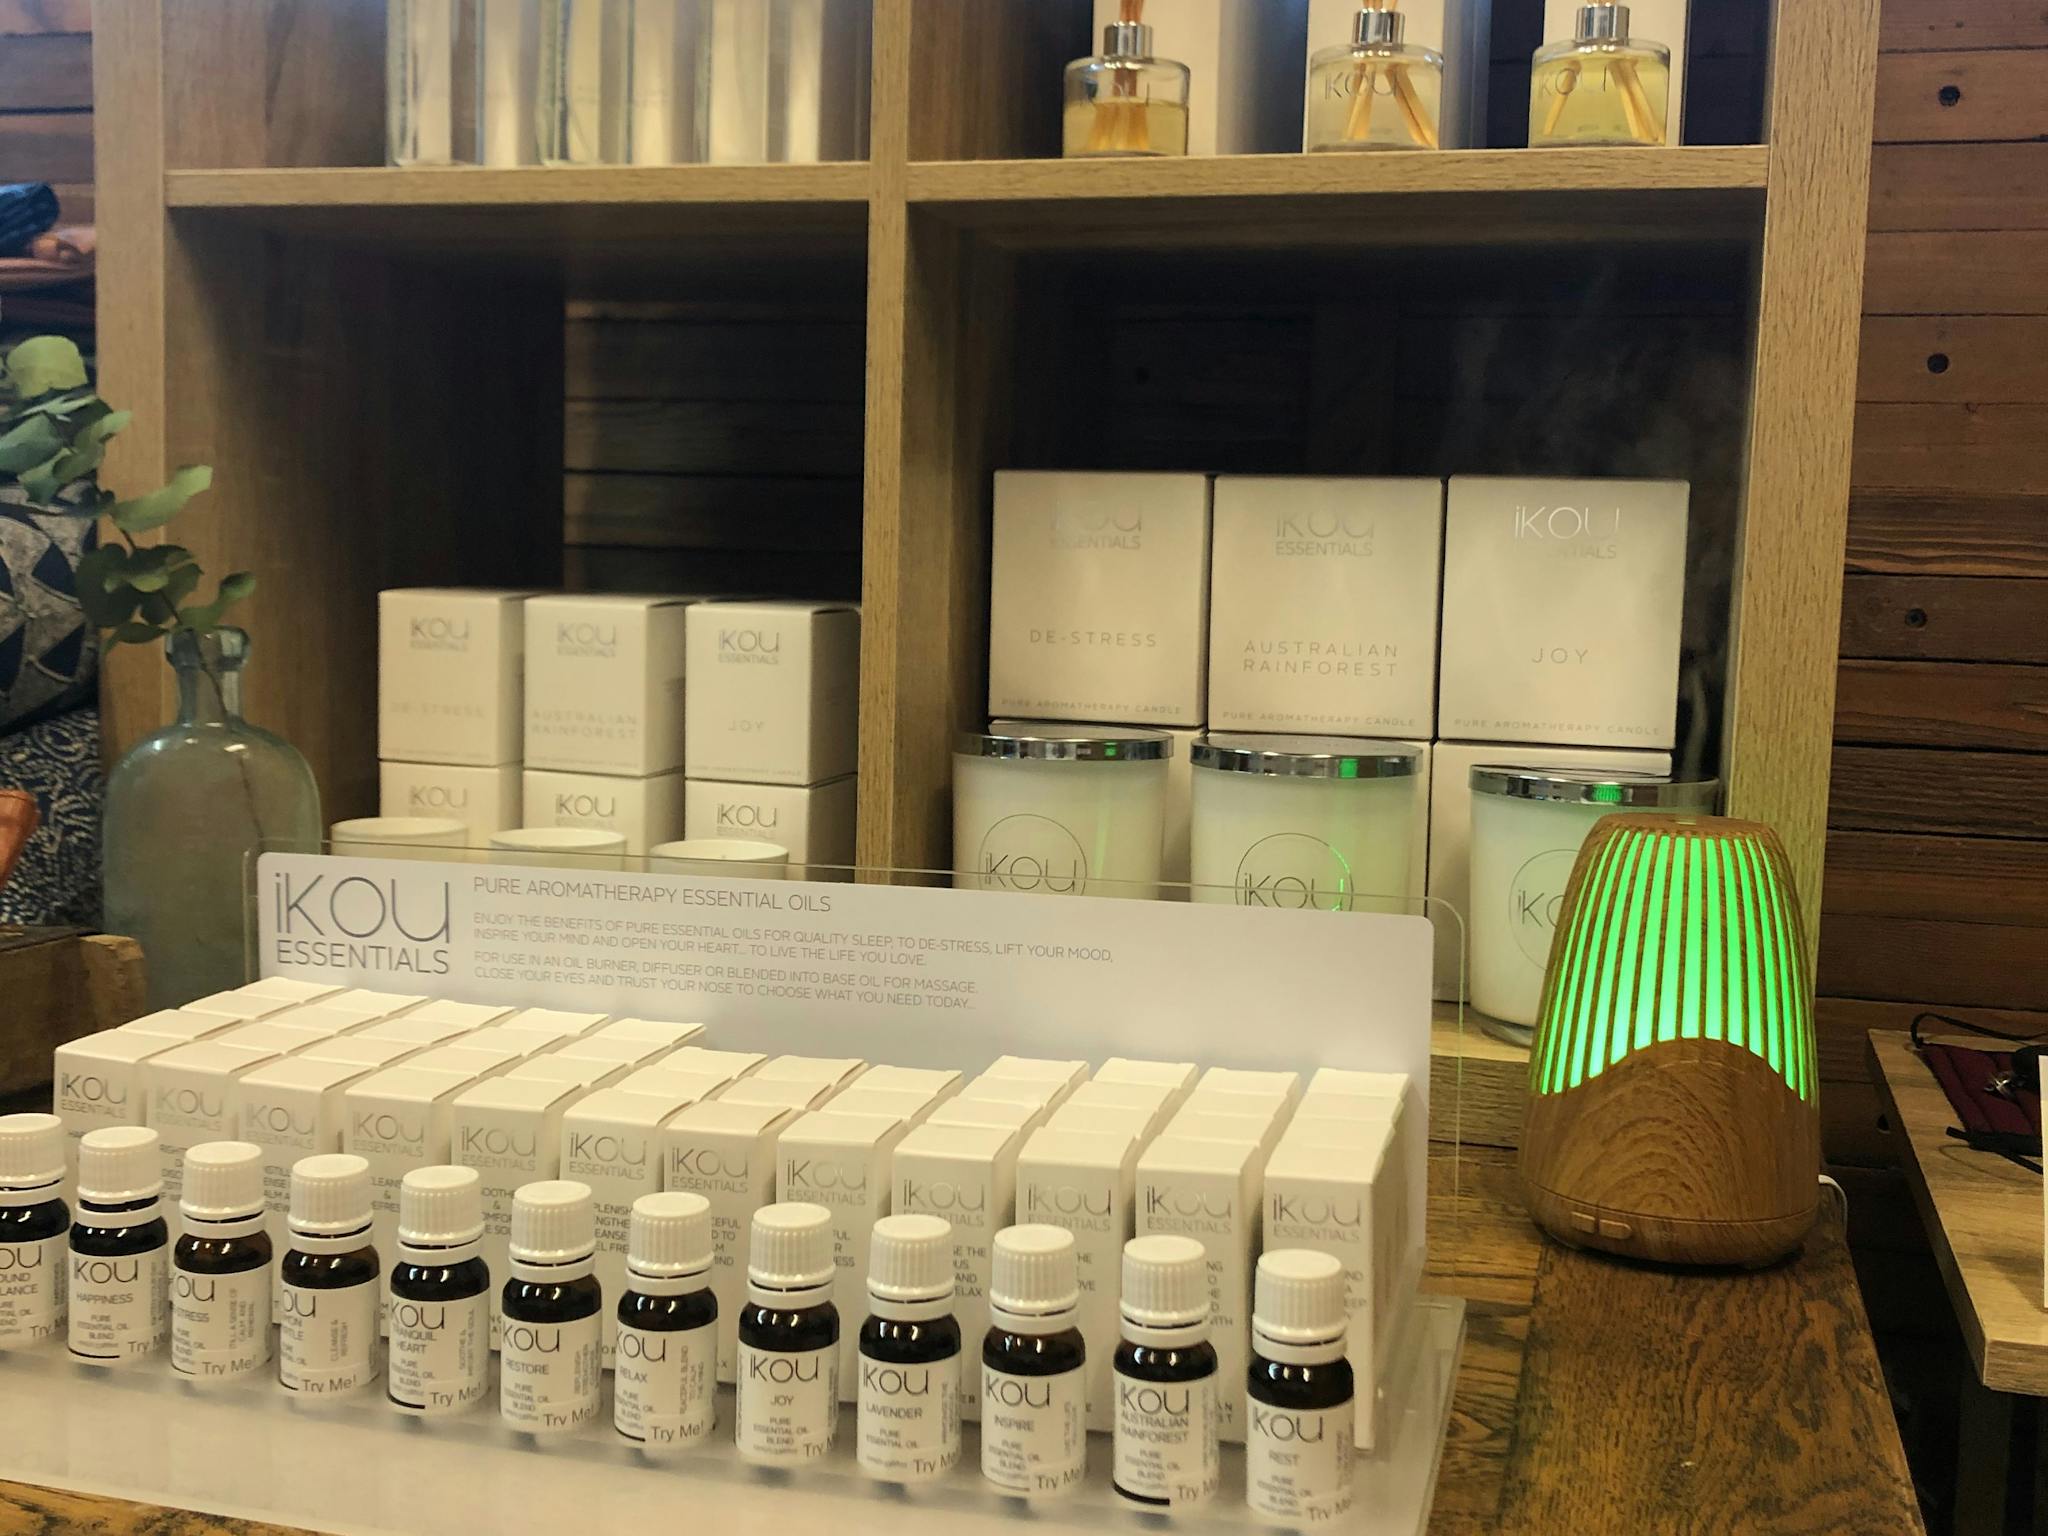 iKOU essential oils, Ultra-sonic diffuser and candles